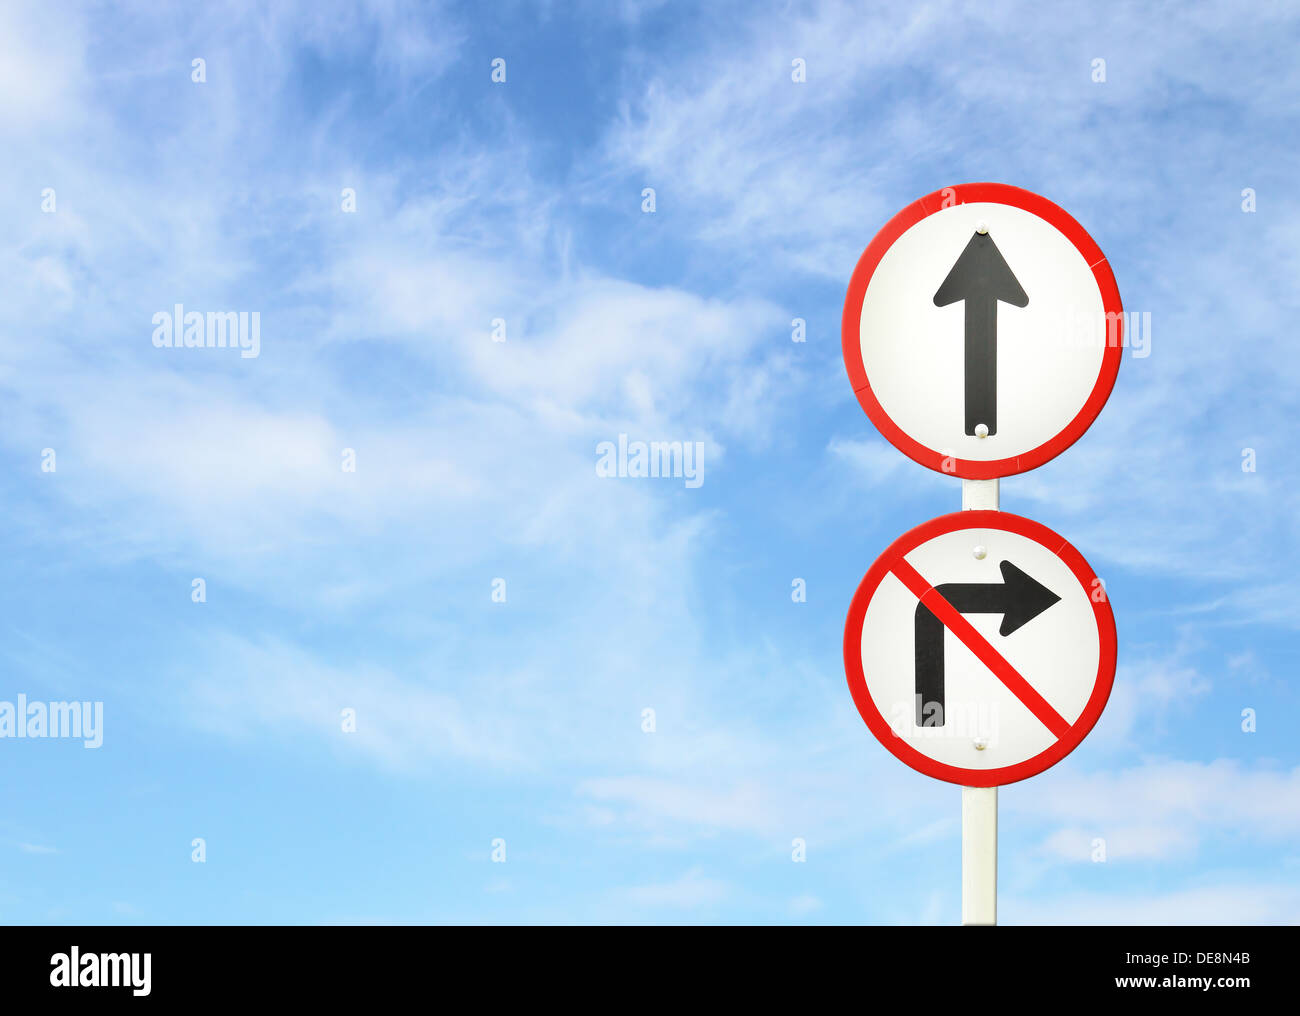 go ahead the way ,forward sign and don't turn right sign with blue sky blank for text Stock Photo